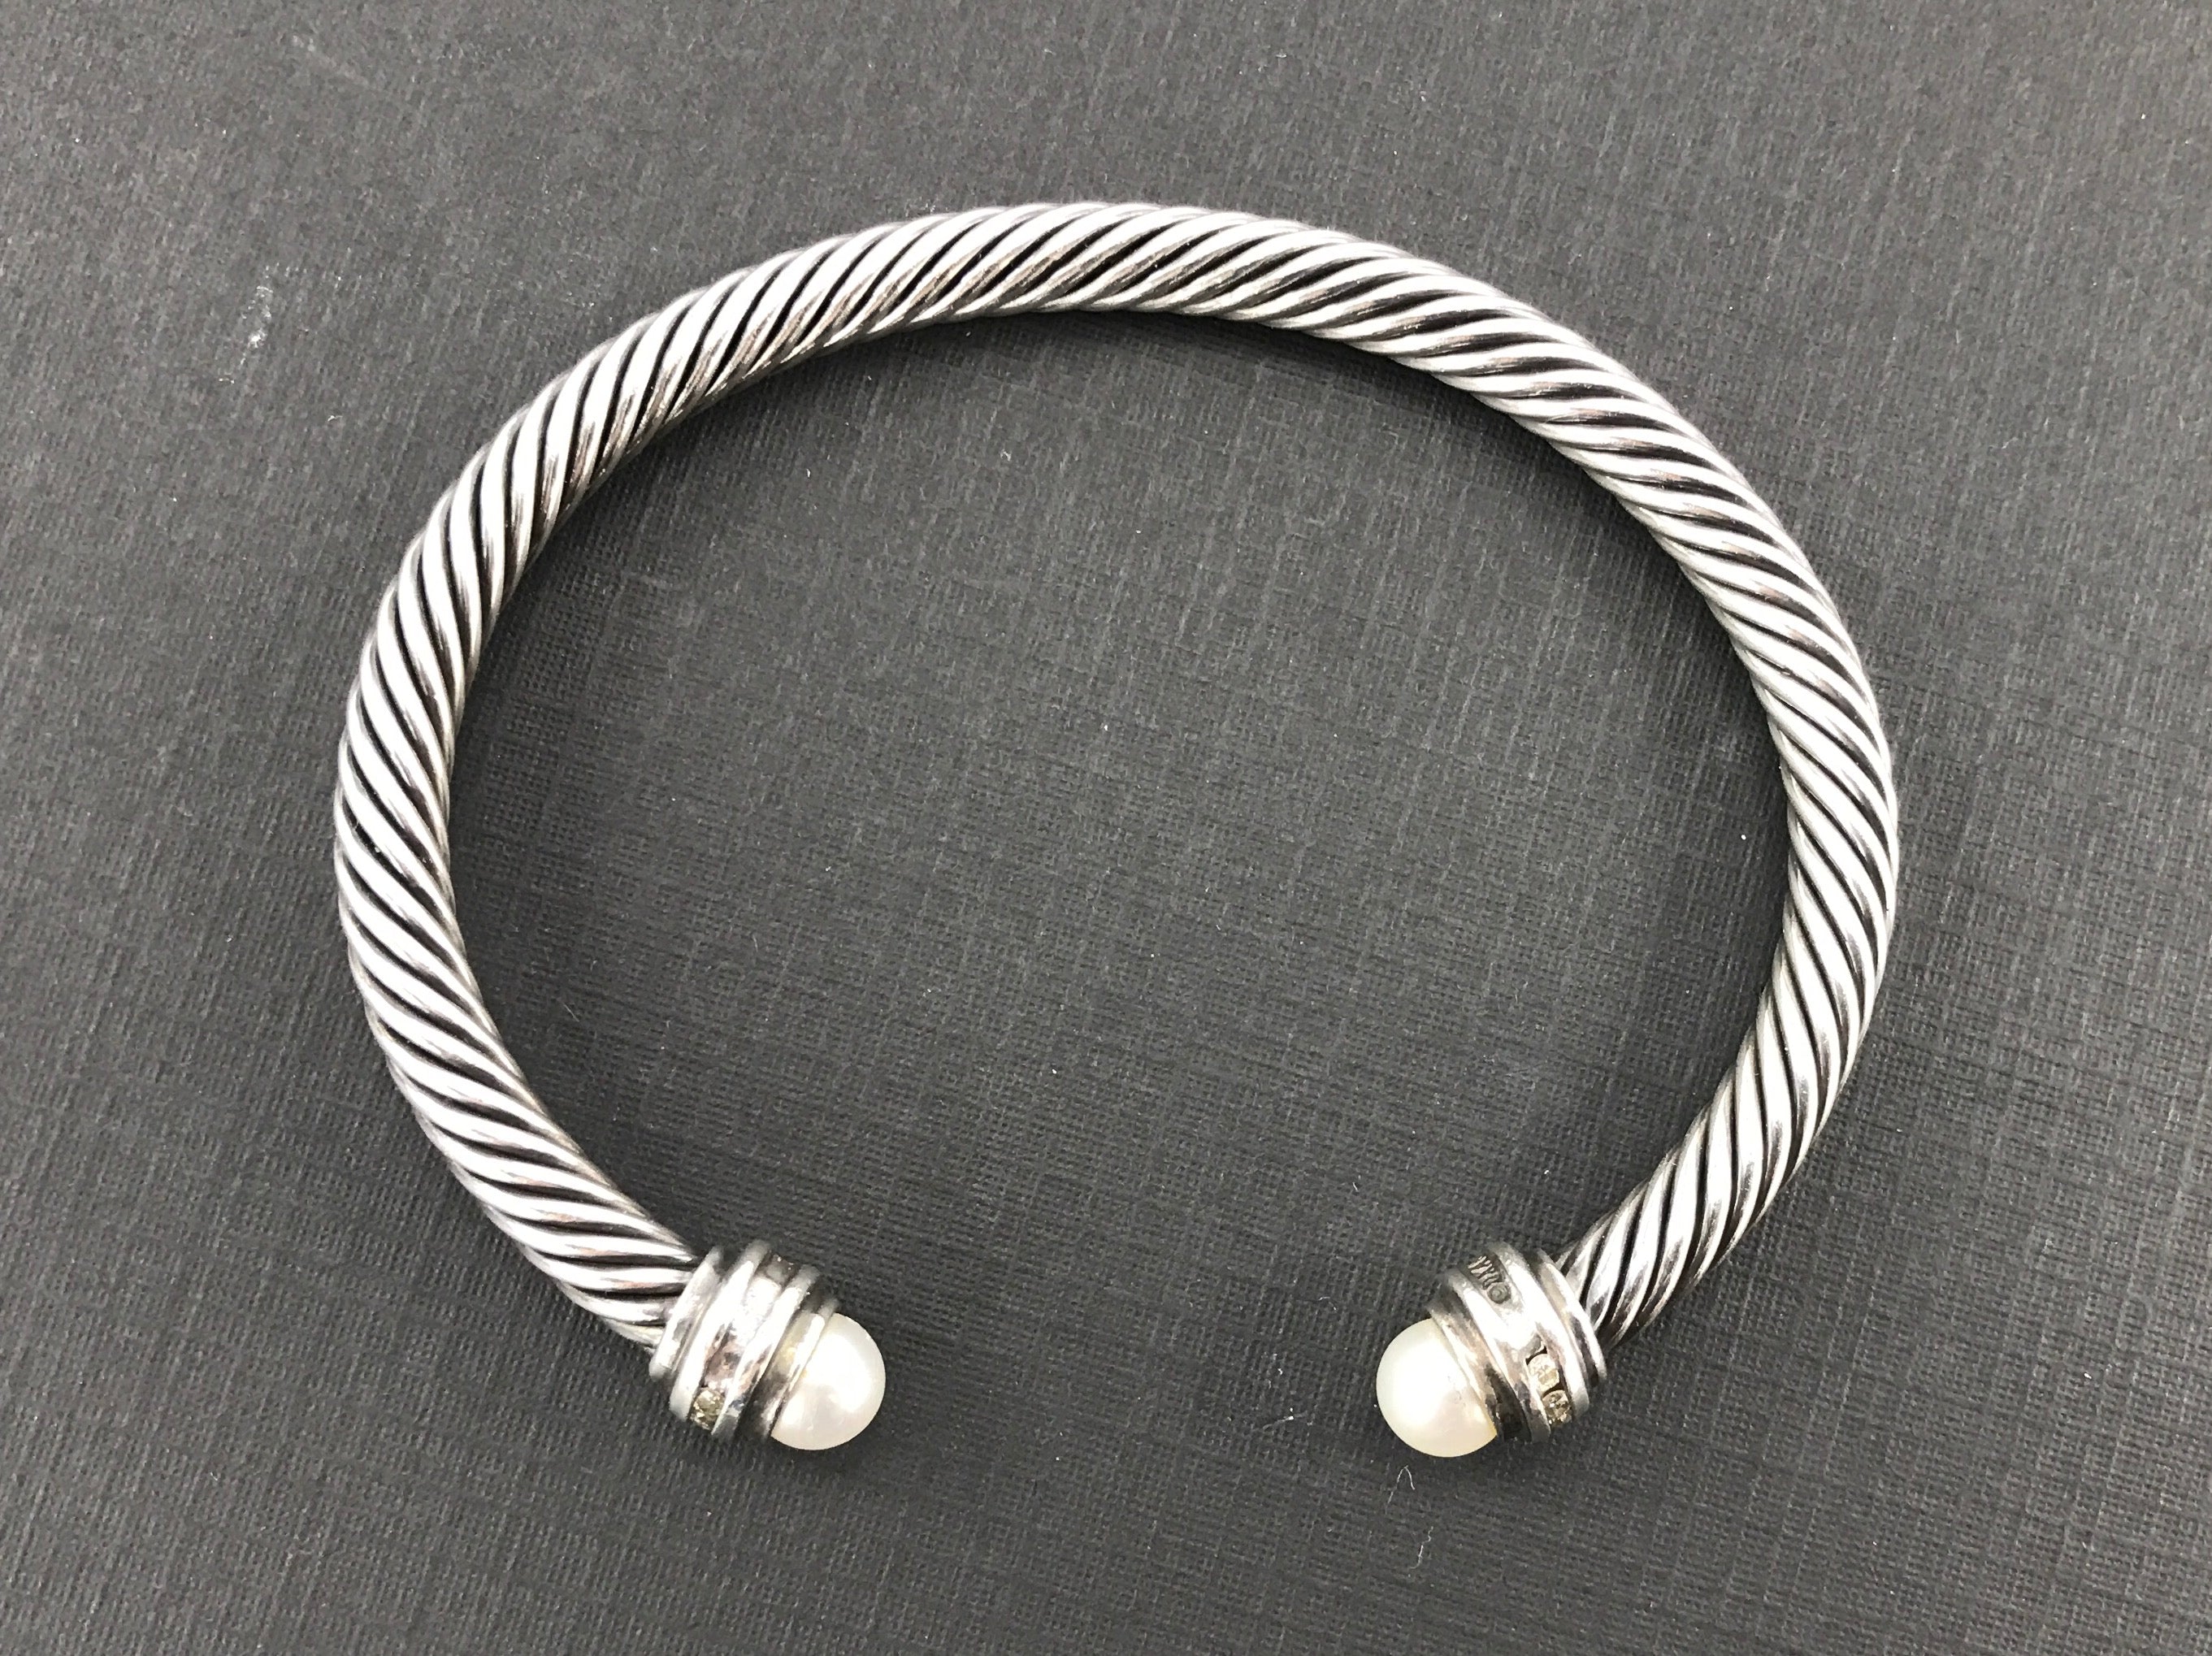 DAVID YURMAN Pearl Pave Cable Bracelet More Than You Can 40 OFF